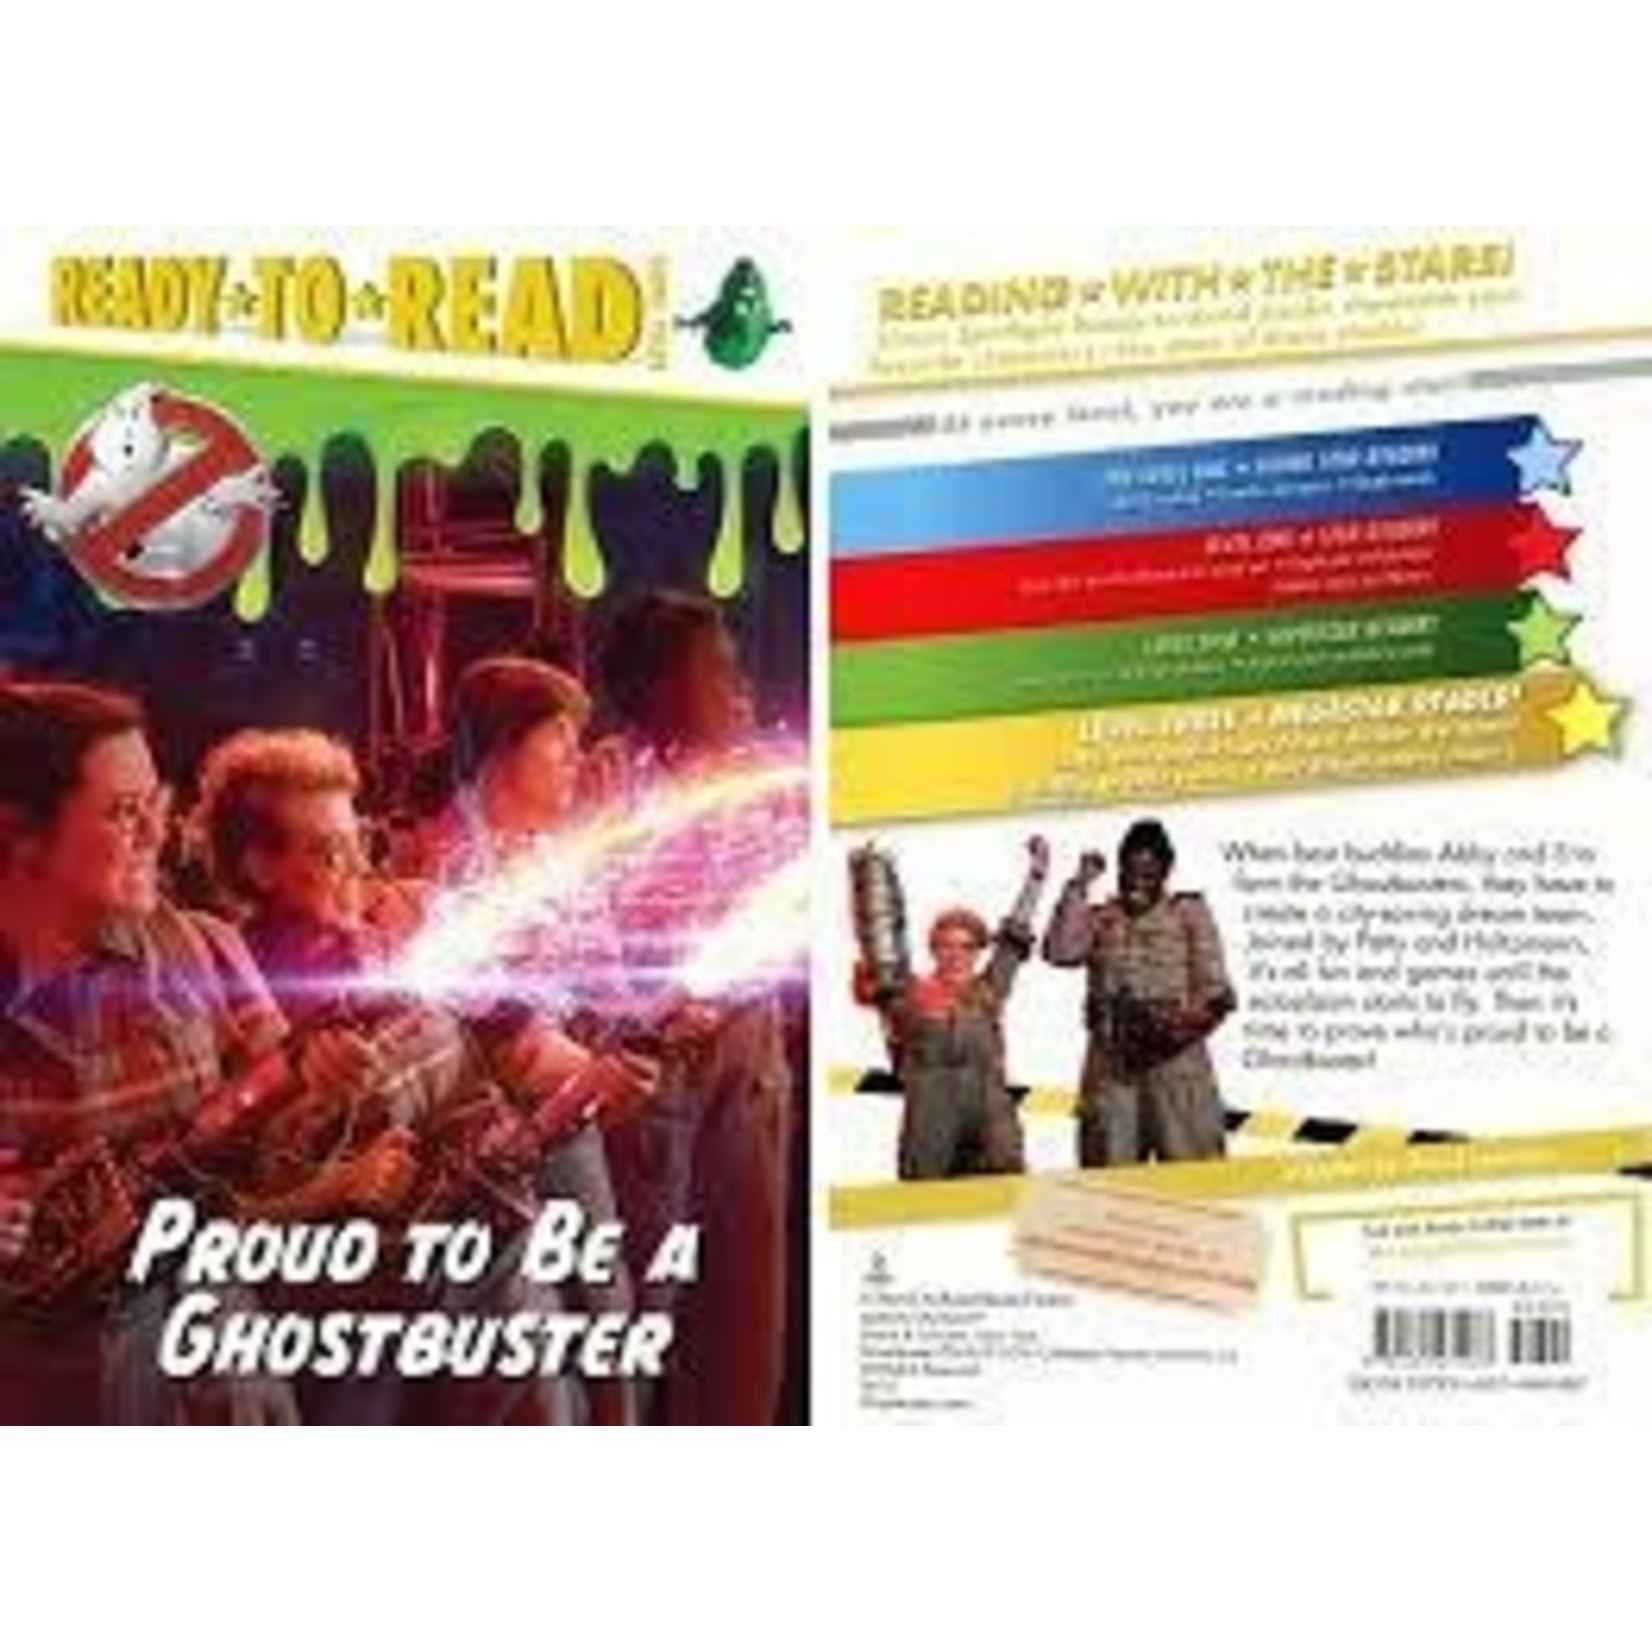 Ghostbusters - Proud to be a Ghostbuster (Ready to Read, Level 3)